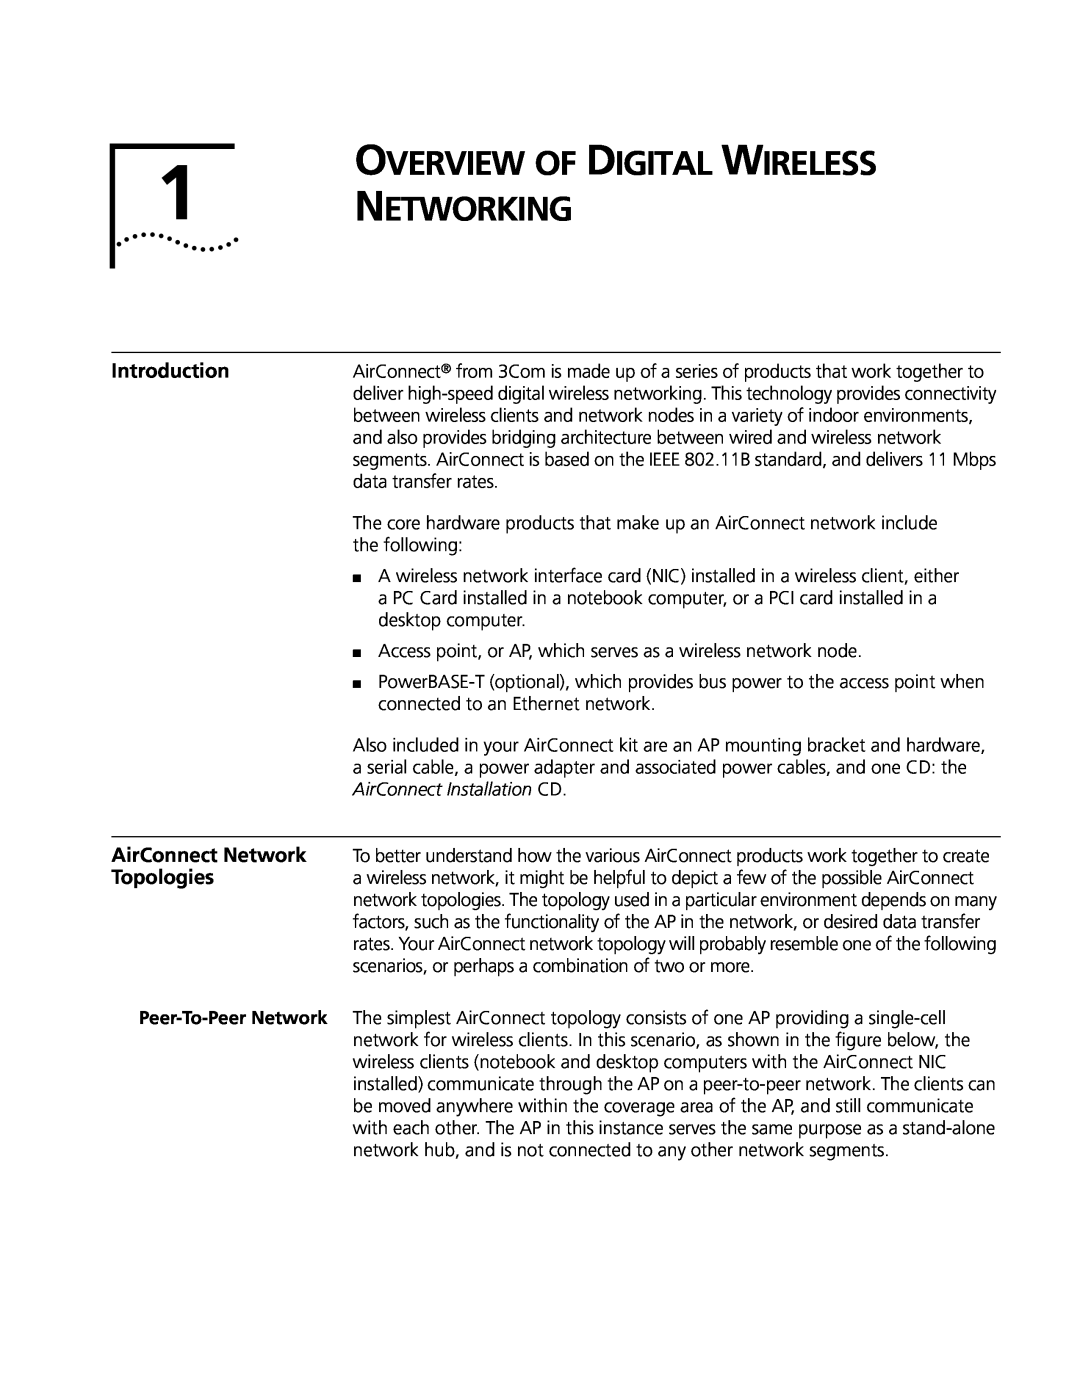 Cabletron Systems 3Com manual OVERVIEW OF DIGITAL WIRELESS 1 NETWORKING, Introduction, AirConnect Network, Topologies 